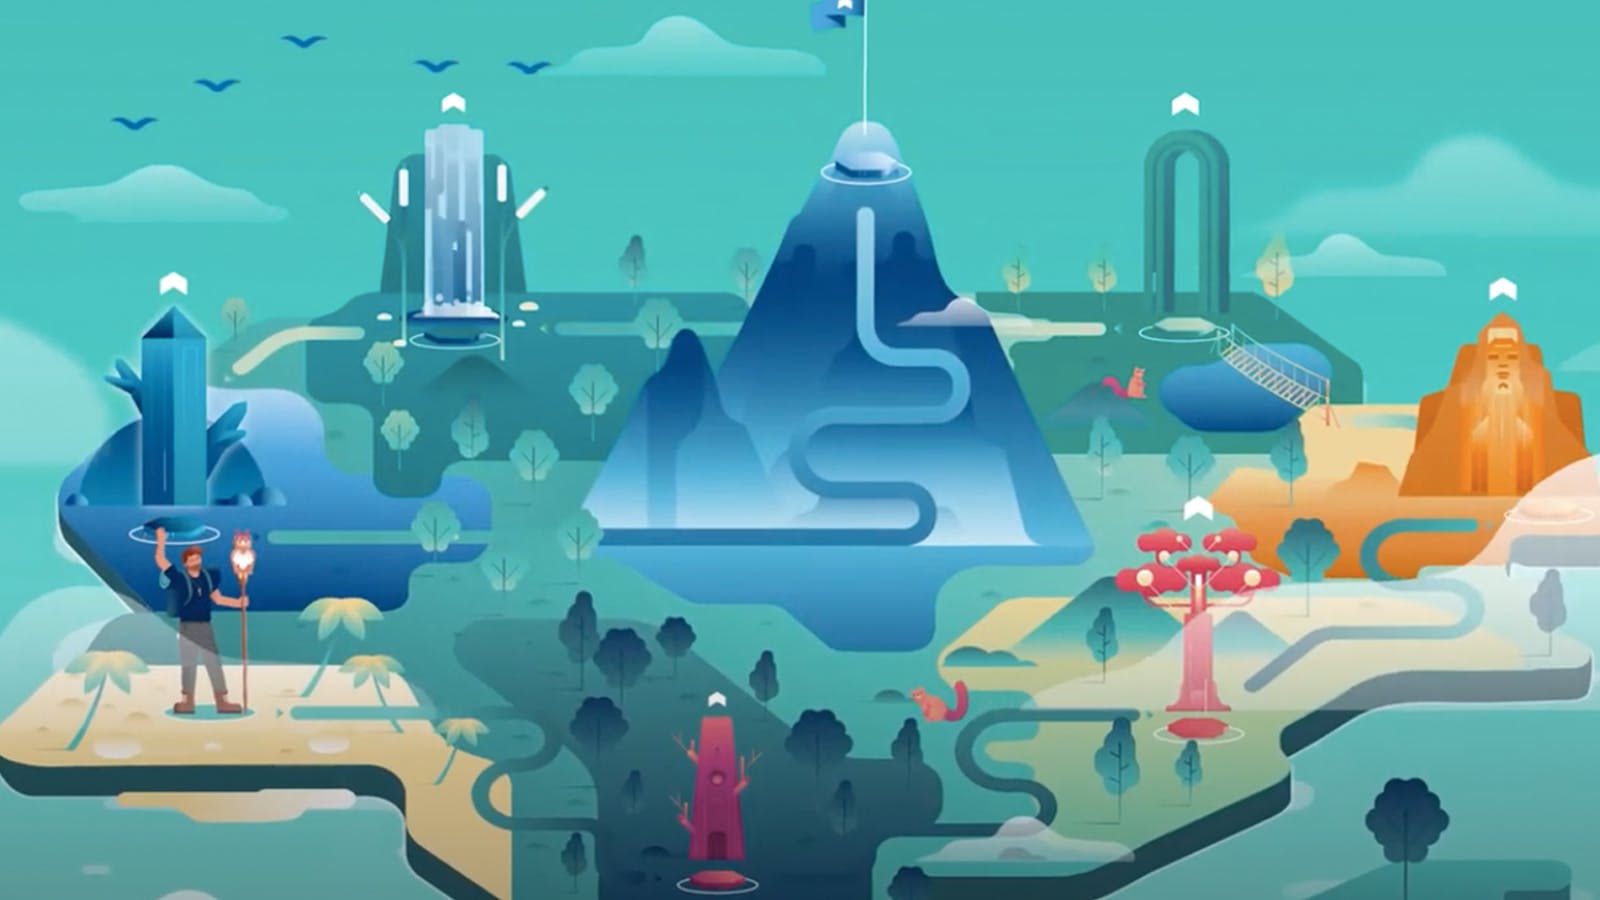 An animated, imaginary world built in a green and blue color palette for the “onUP Challenge.” 